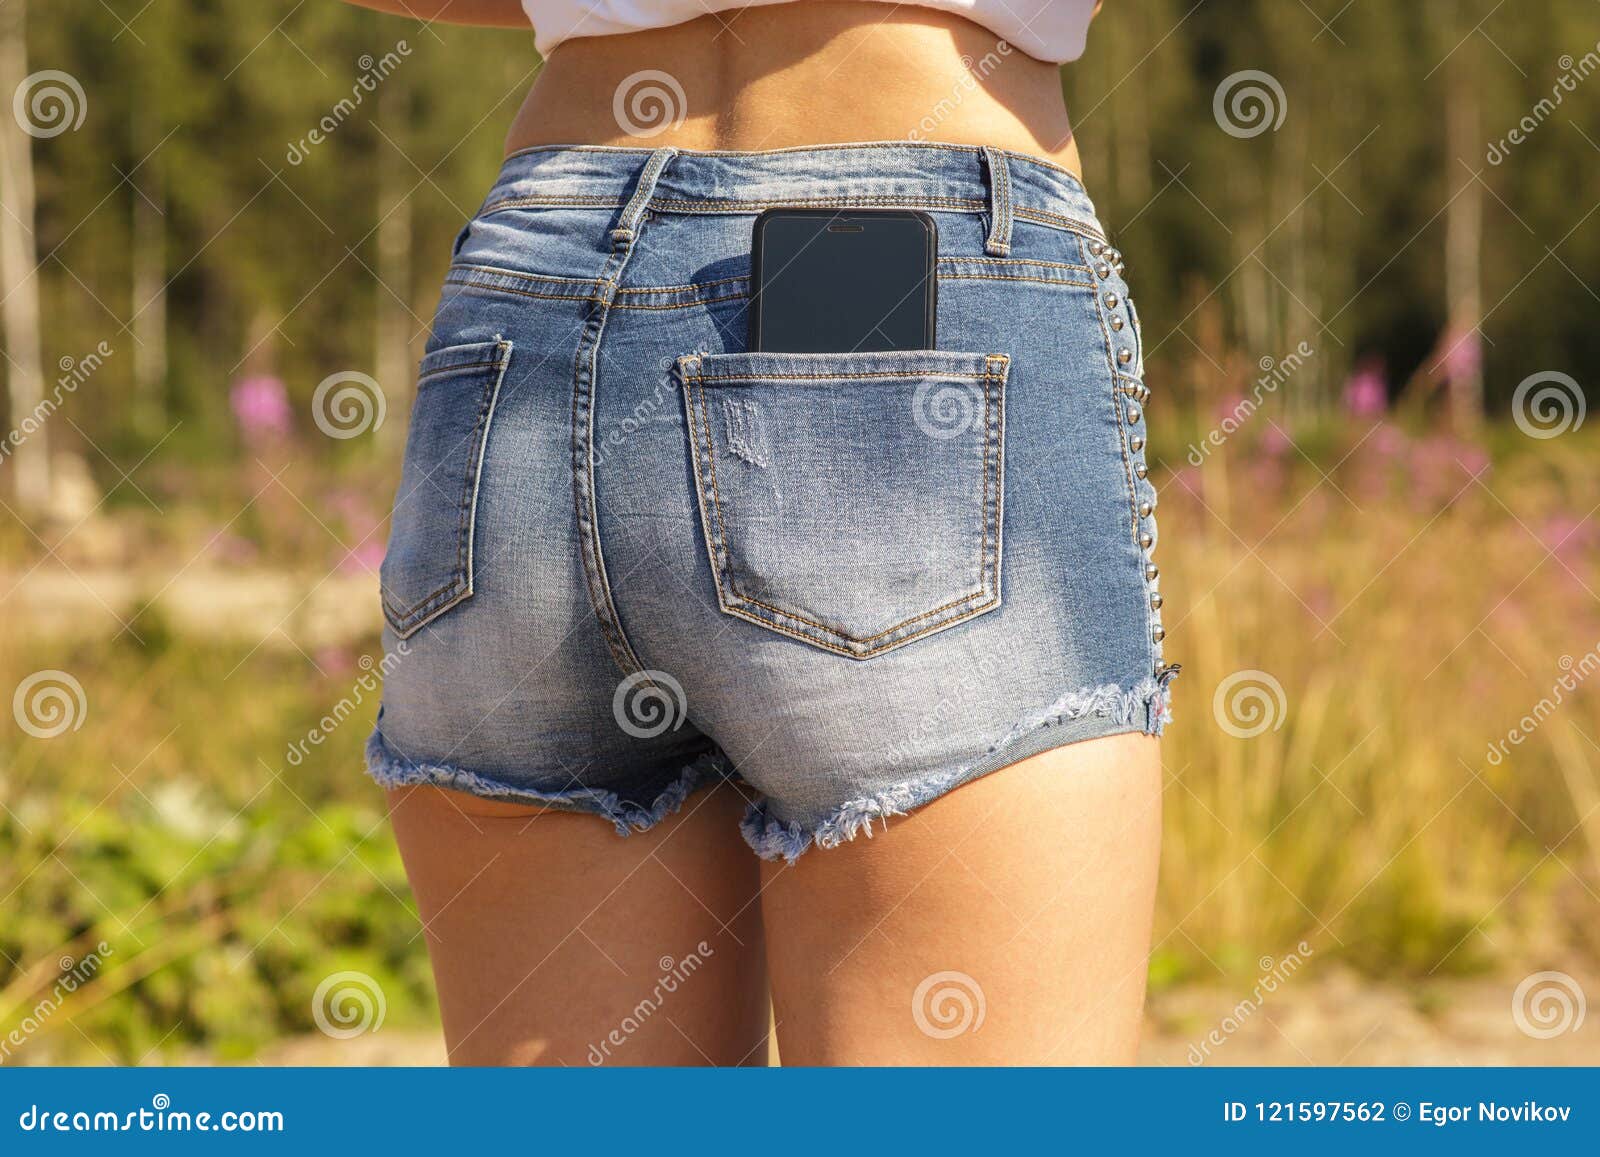 Beautiful Girl With A Black Smartphone In The Back Pocket Of A Jeans Stock Photo - Image of ...